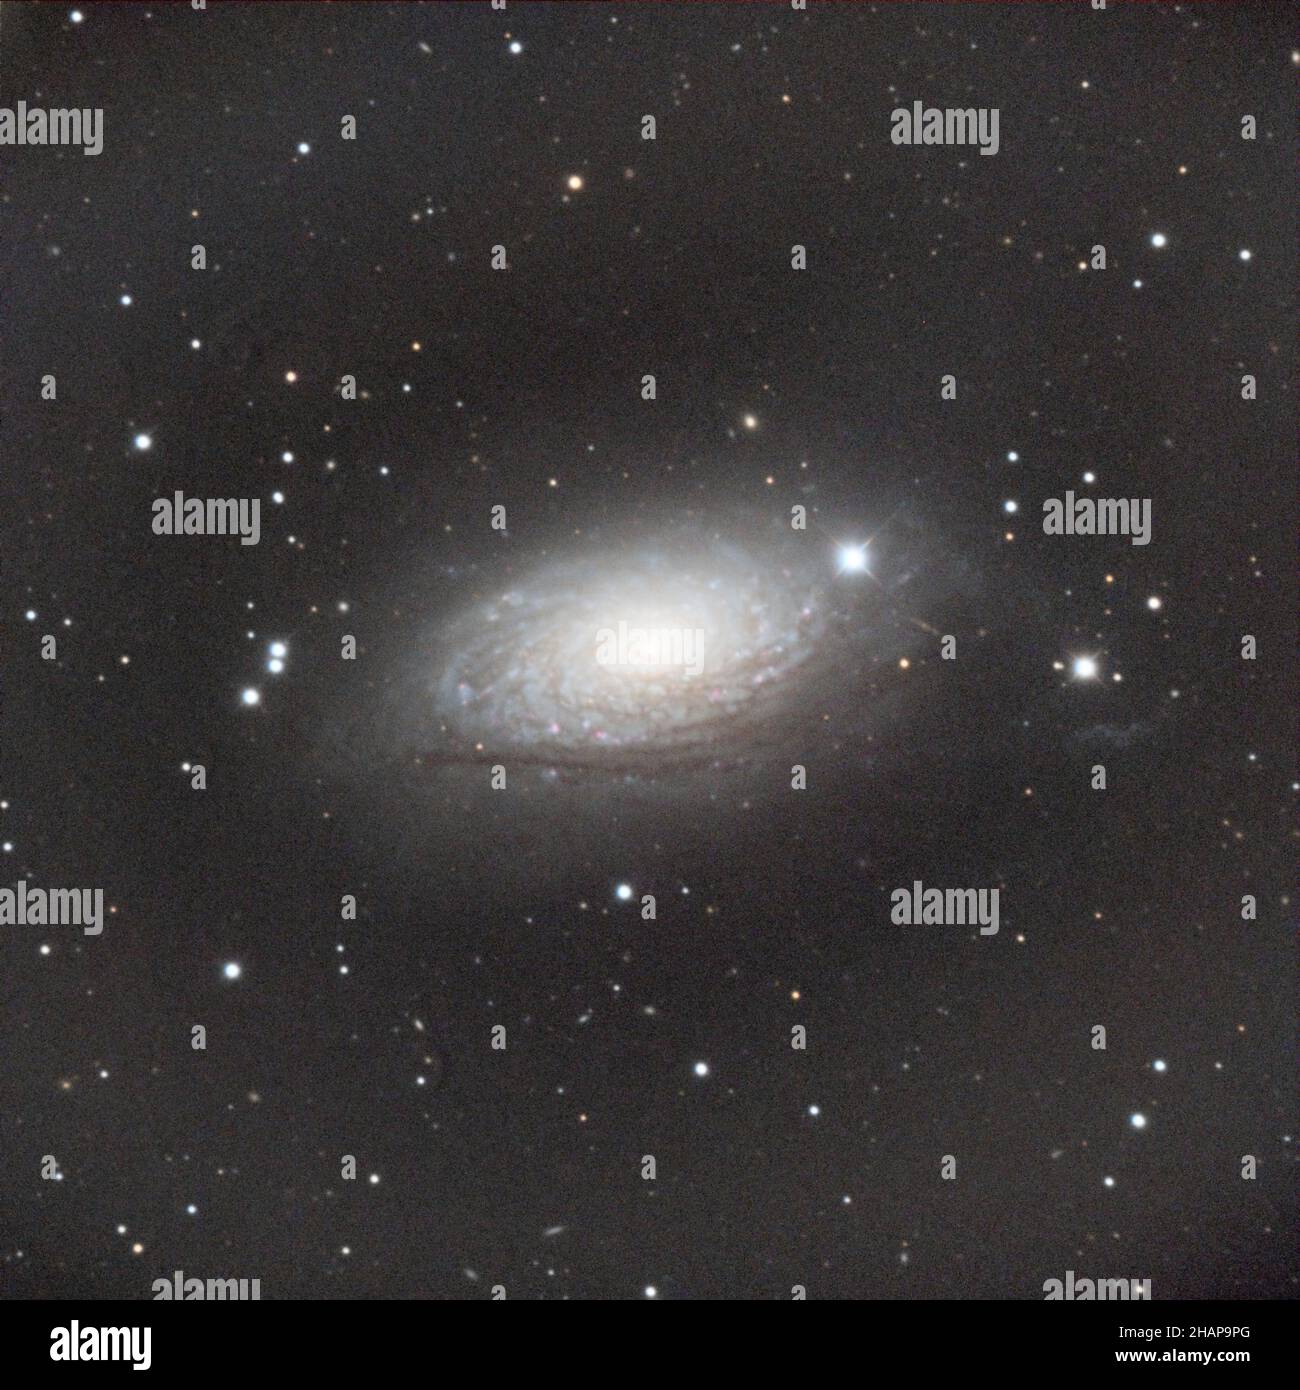 Messier 63 or M63, also known as NGC 5055 or the seldom-used Sunflower Galaxy,[6] is a spiral galaxy in the northern constellation of Canes Venatici Stock Photo